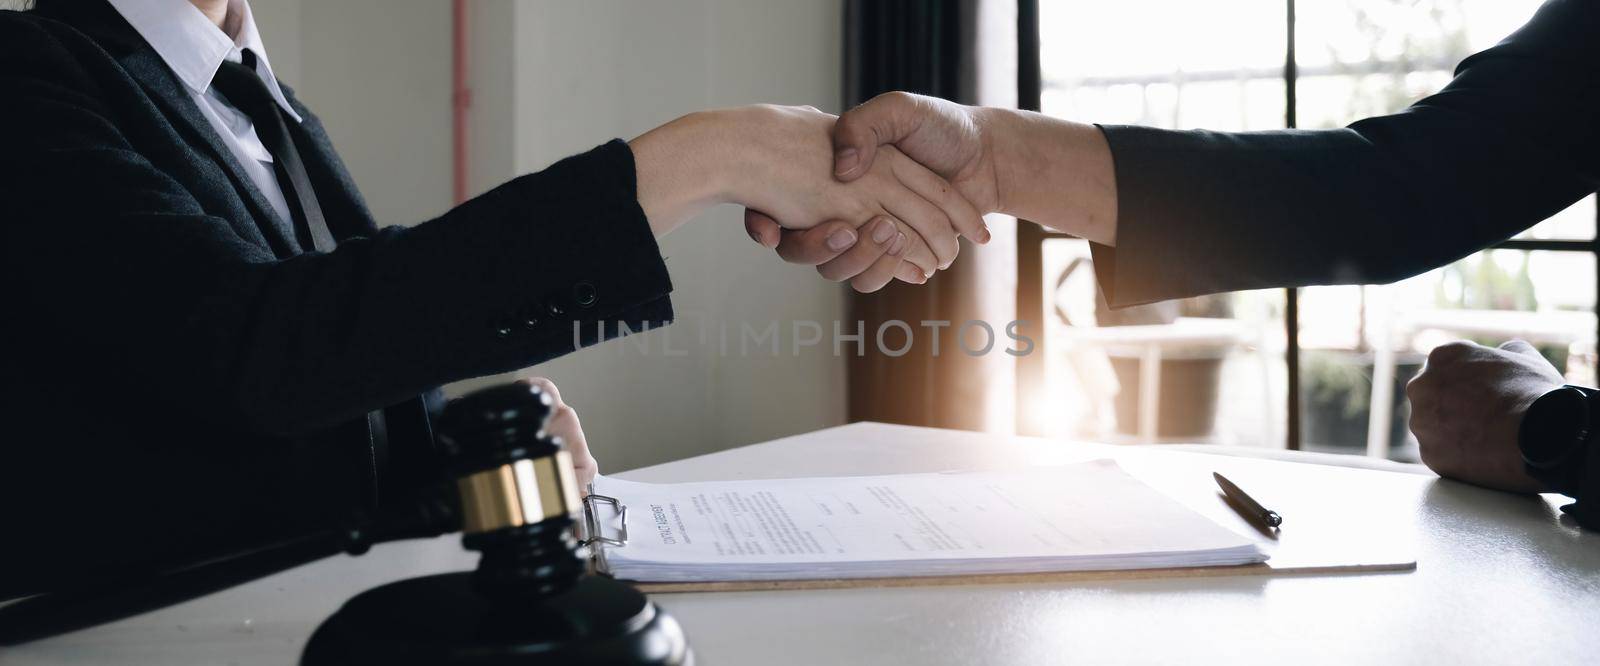 Good service cooperation of Consultation between a male lawyer and business woman customer, Handshake after good deal agreement, Law and Legal concept. by wichayada